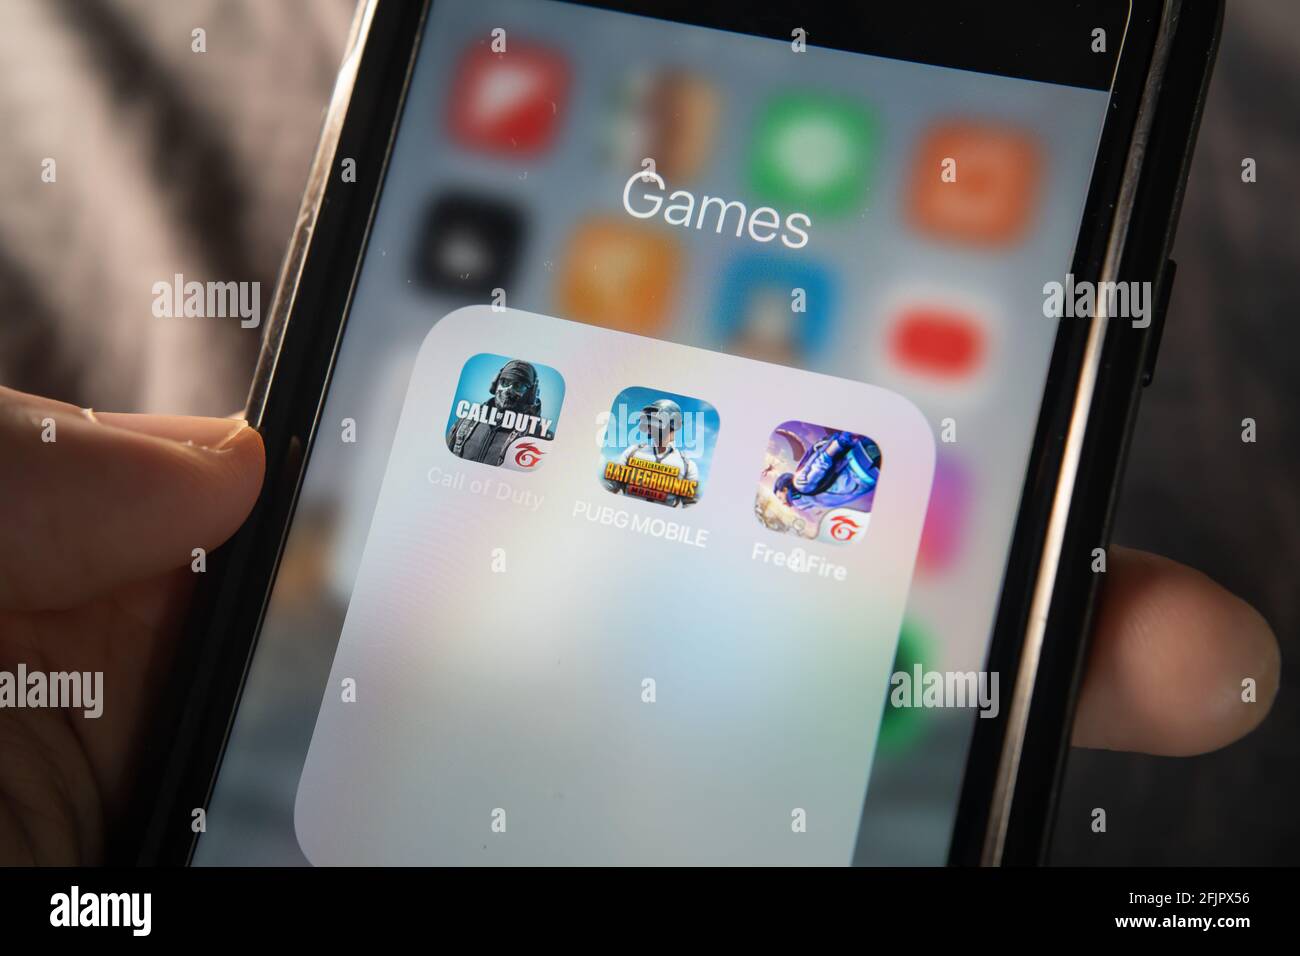 Bangkok, Thailand - April 17, 2021 : iPhone 7 showing its screen with popular shooting games which are Call of Duty mobile, PUBG mobile and Free Fire. Stock Photo